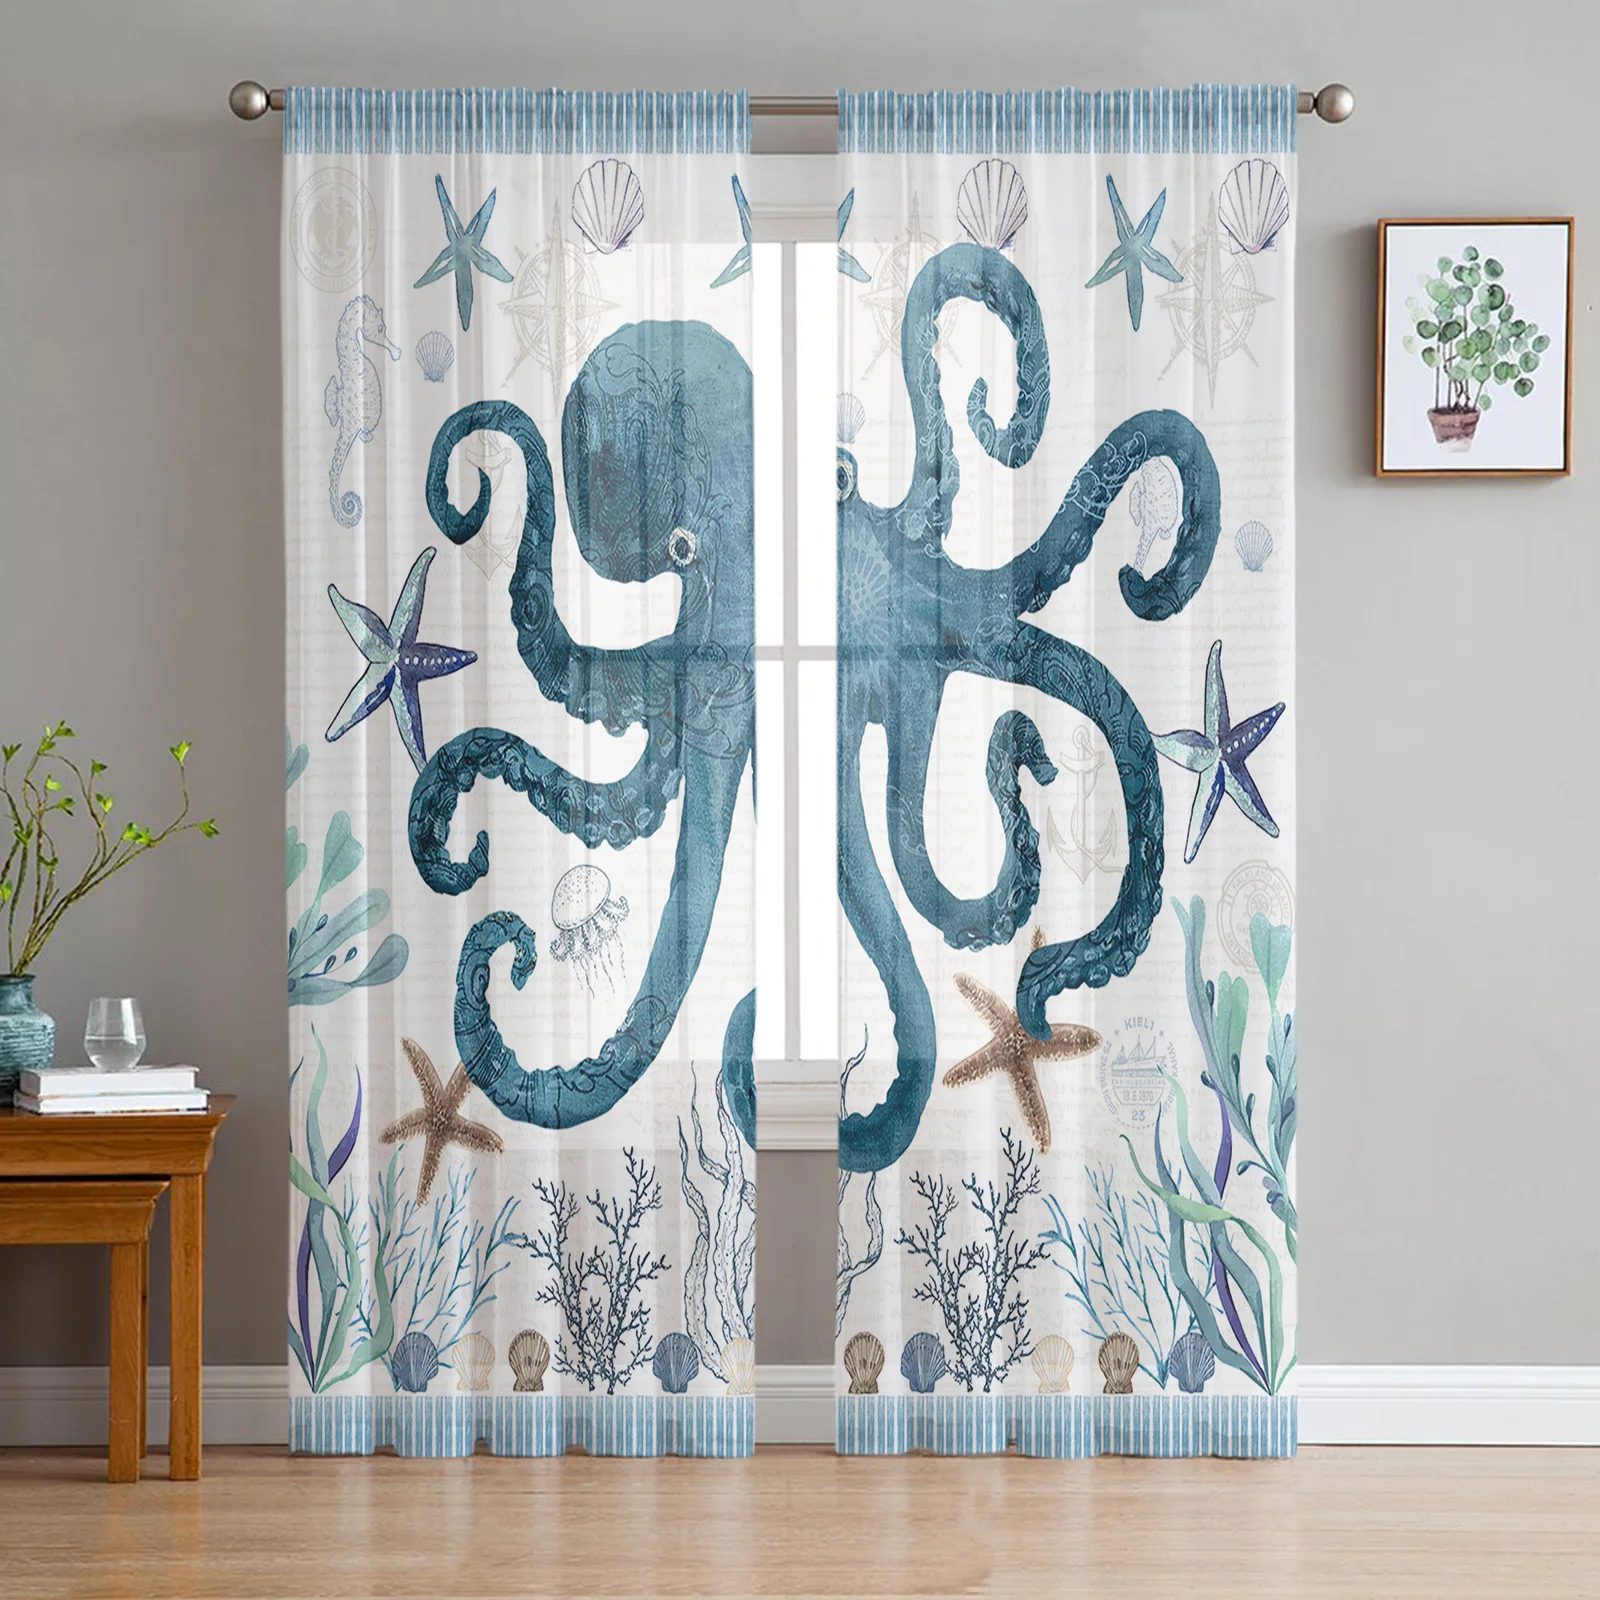 

Ocean Stripes Starfish Octopus Sheer Curtains for Living Room Bedroom Home Decor Kitchen Tulle for Windows Voile Drapes